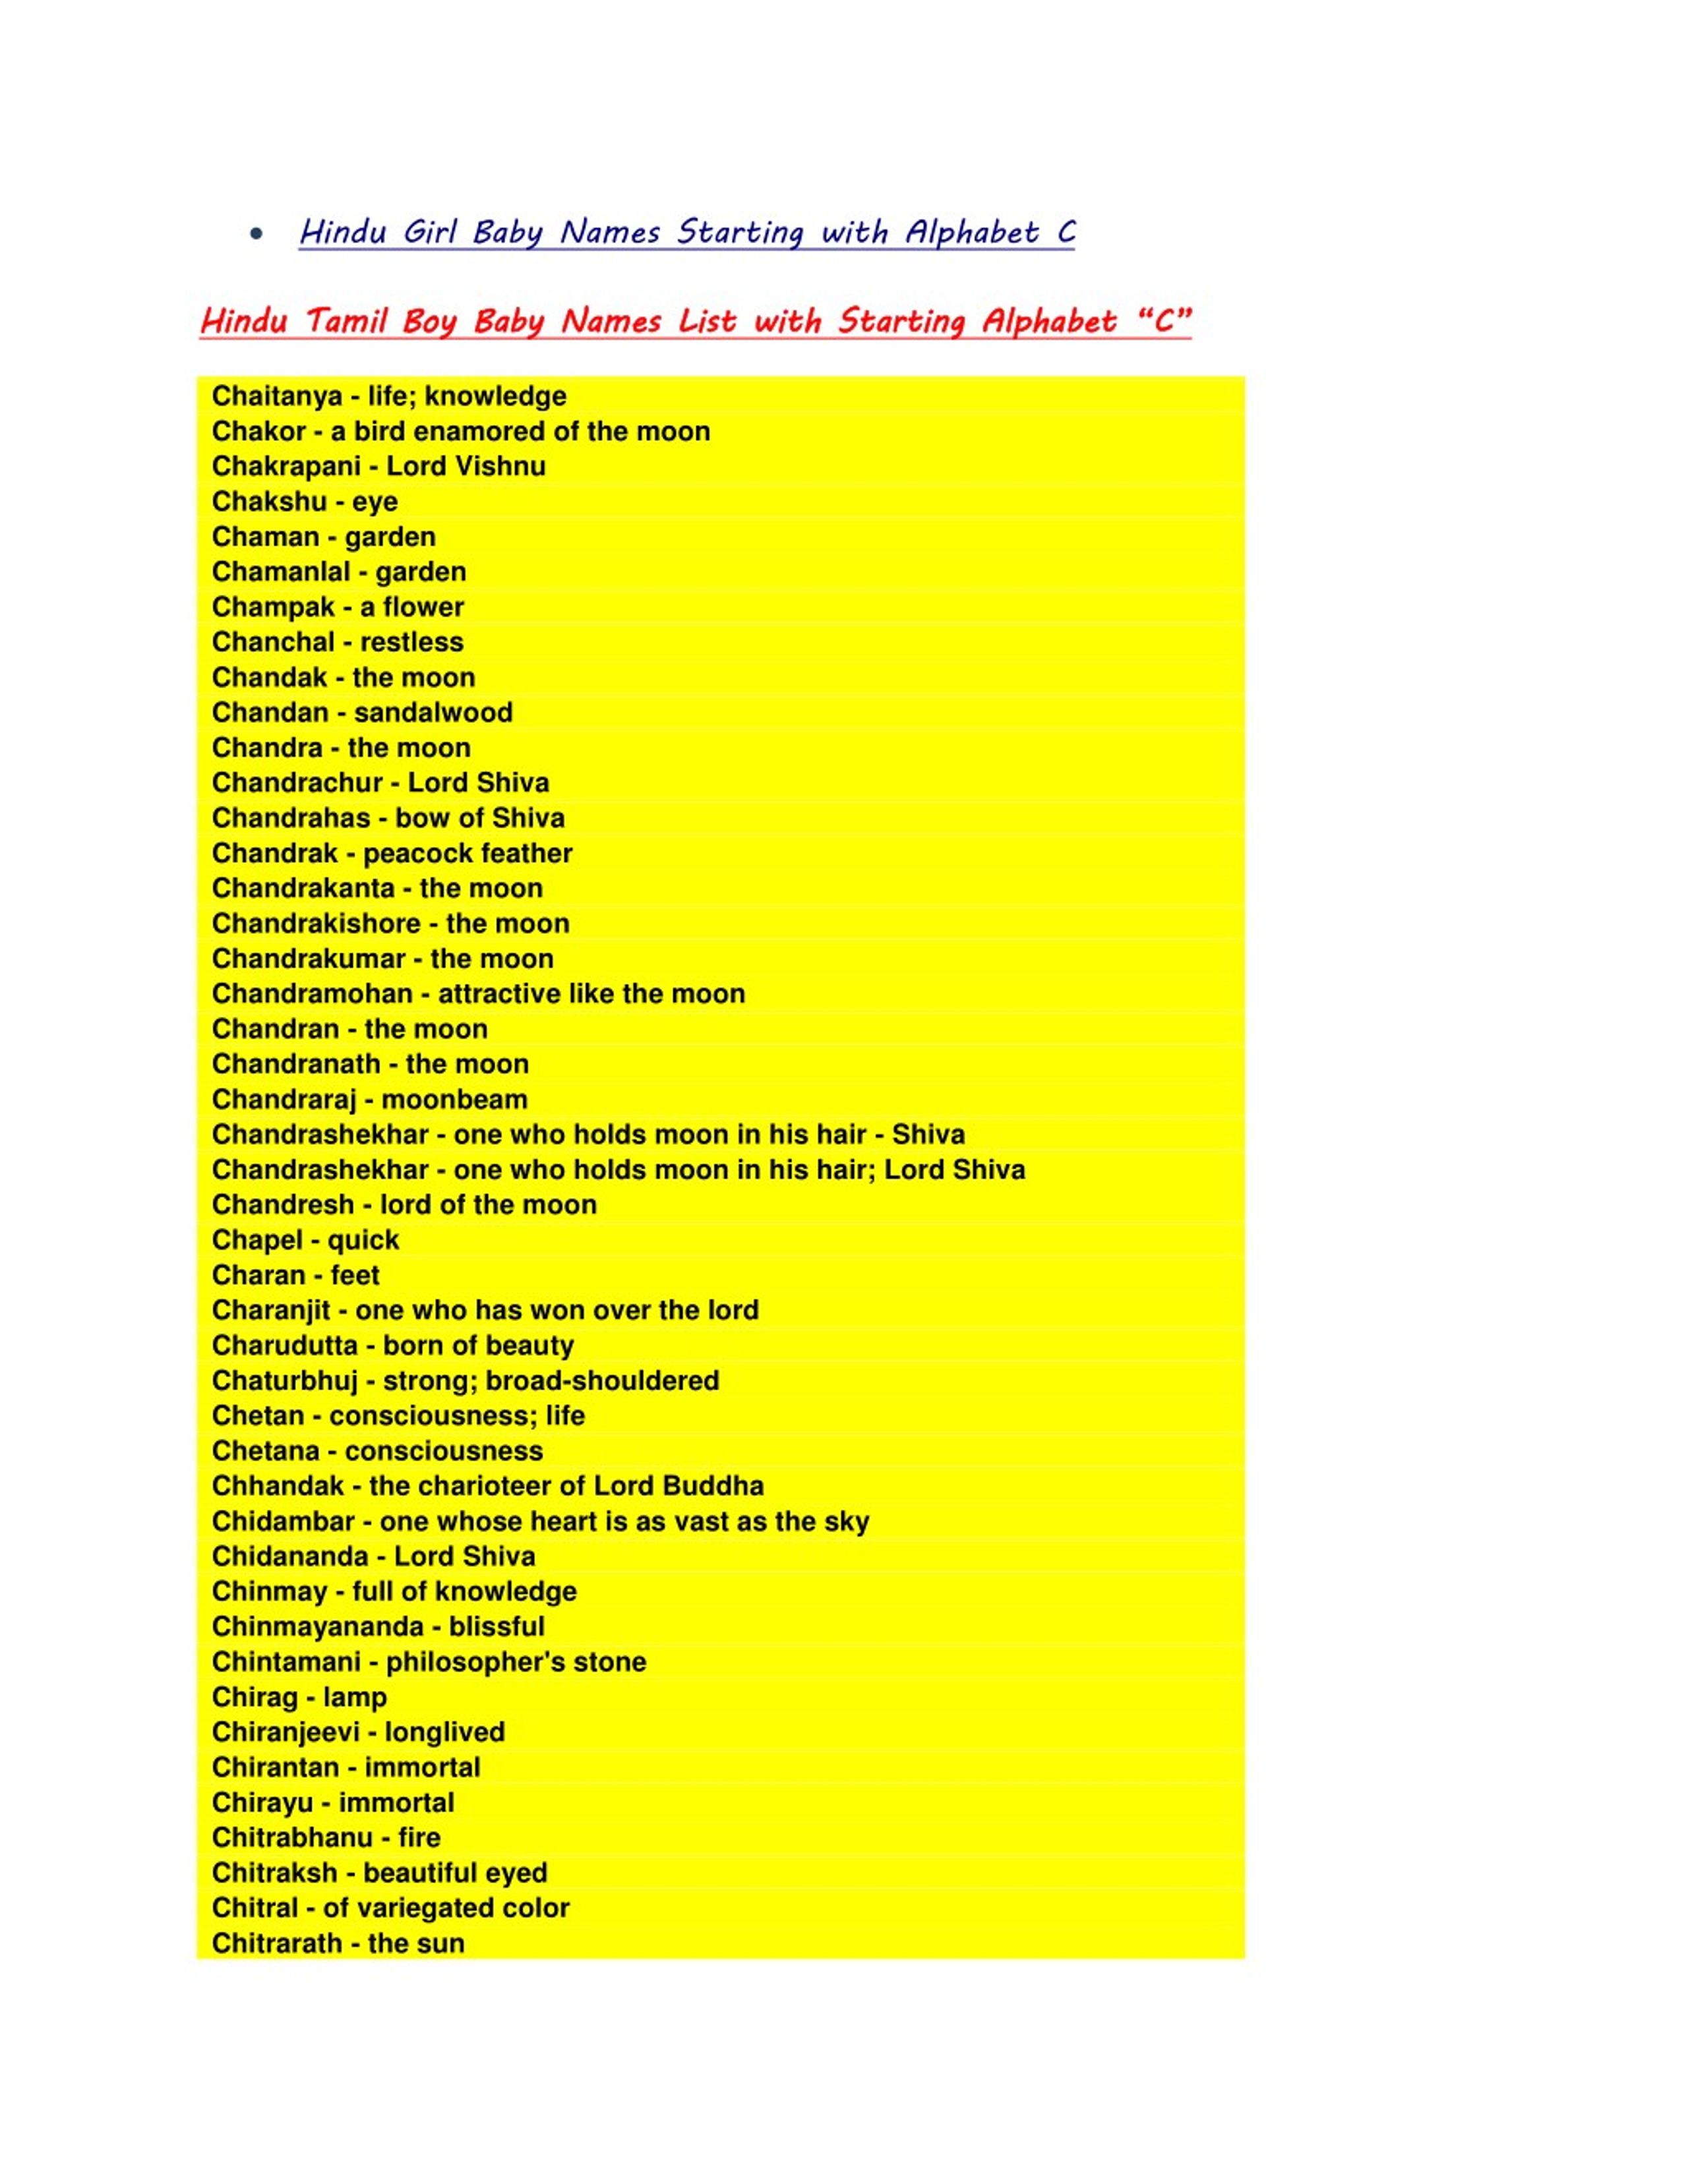 PPT - Indian Hindu Boy Baby Names with Letter C | Hindu ...